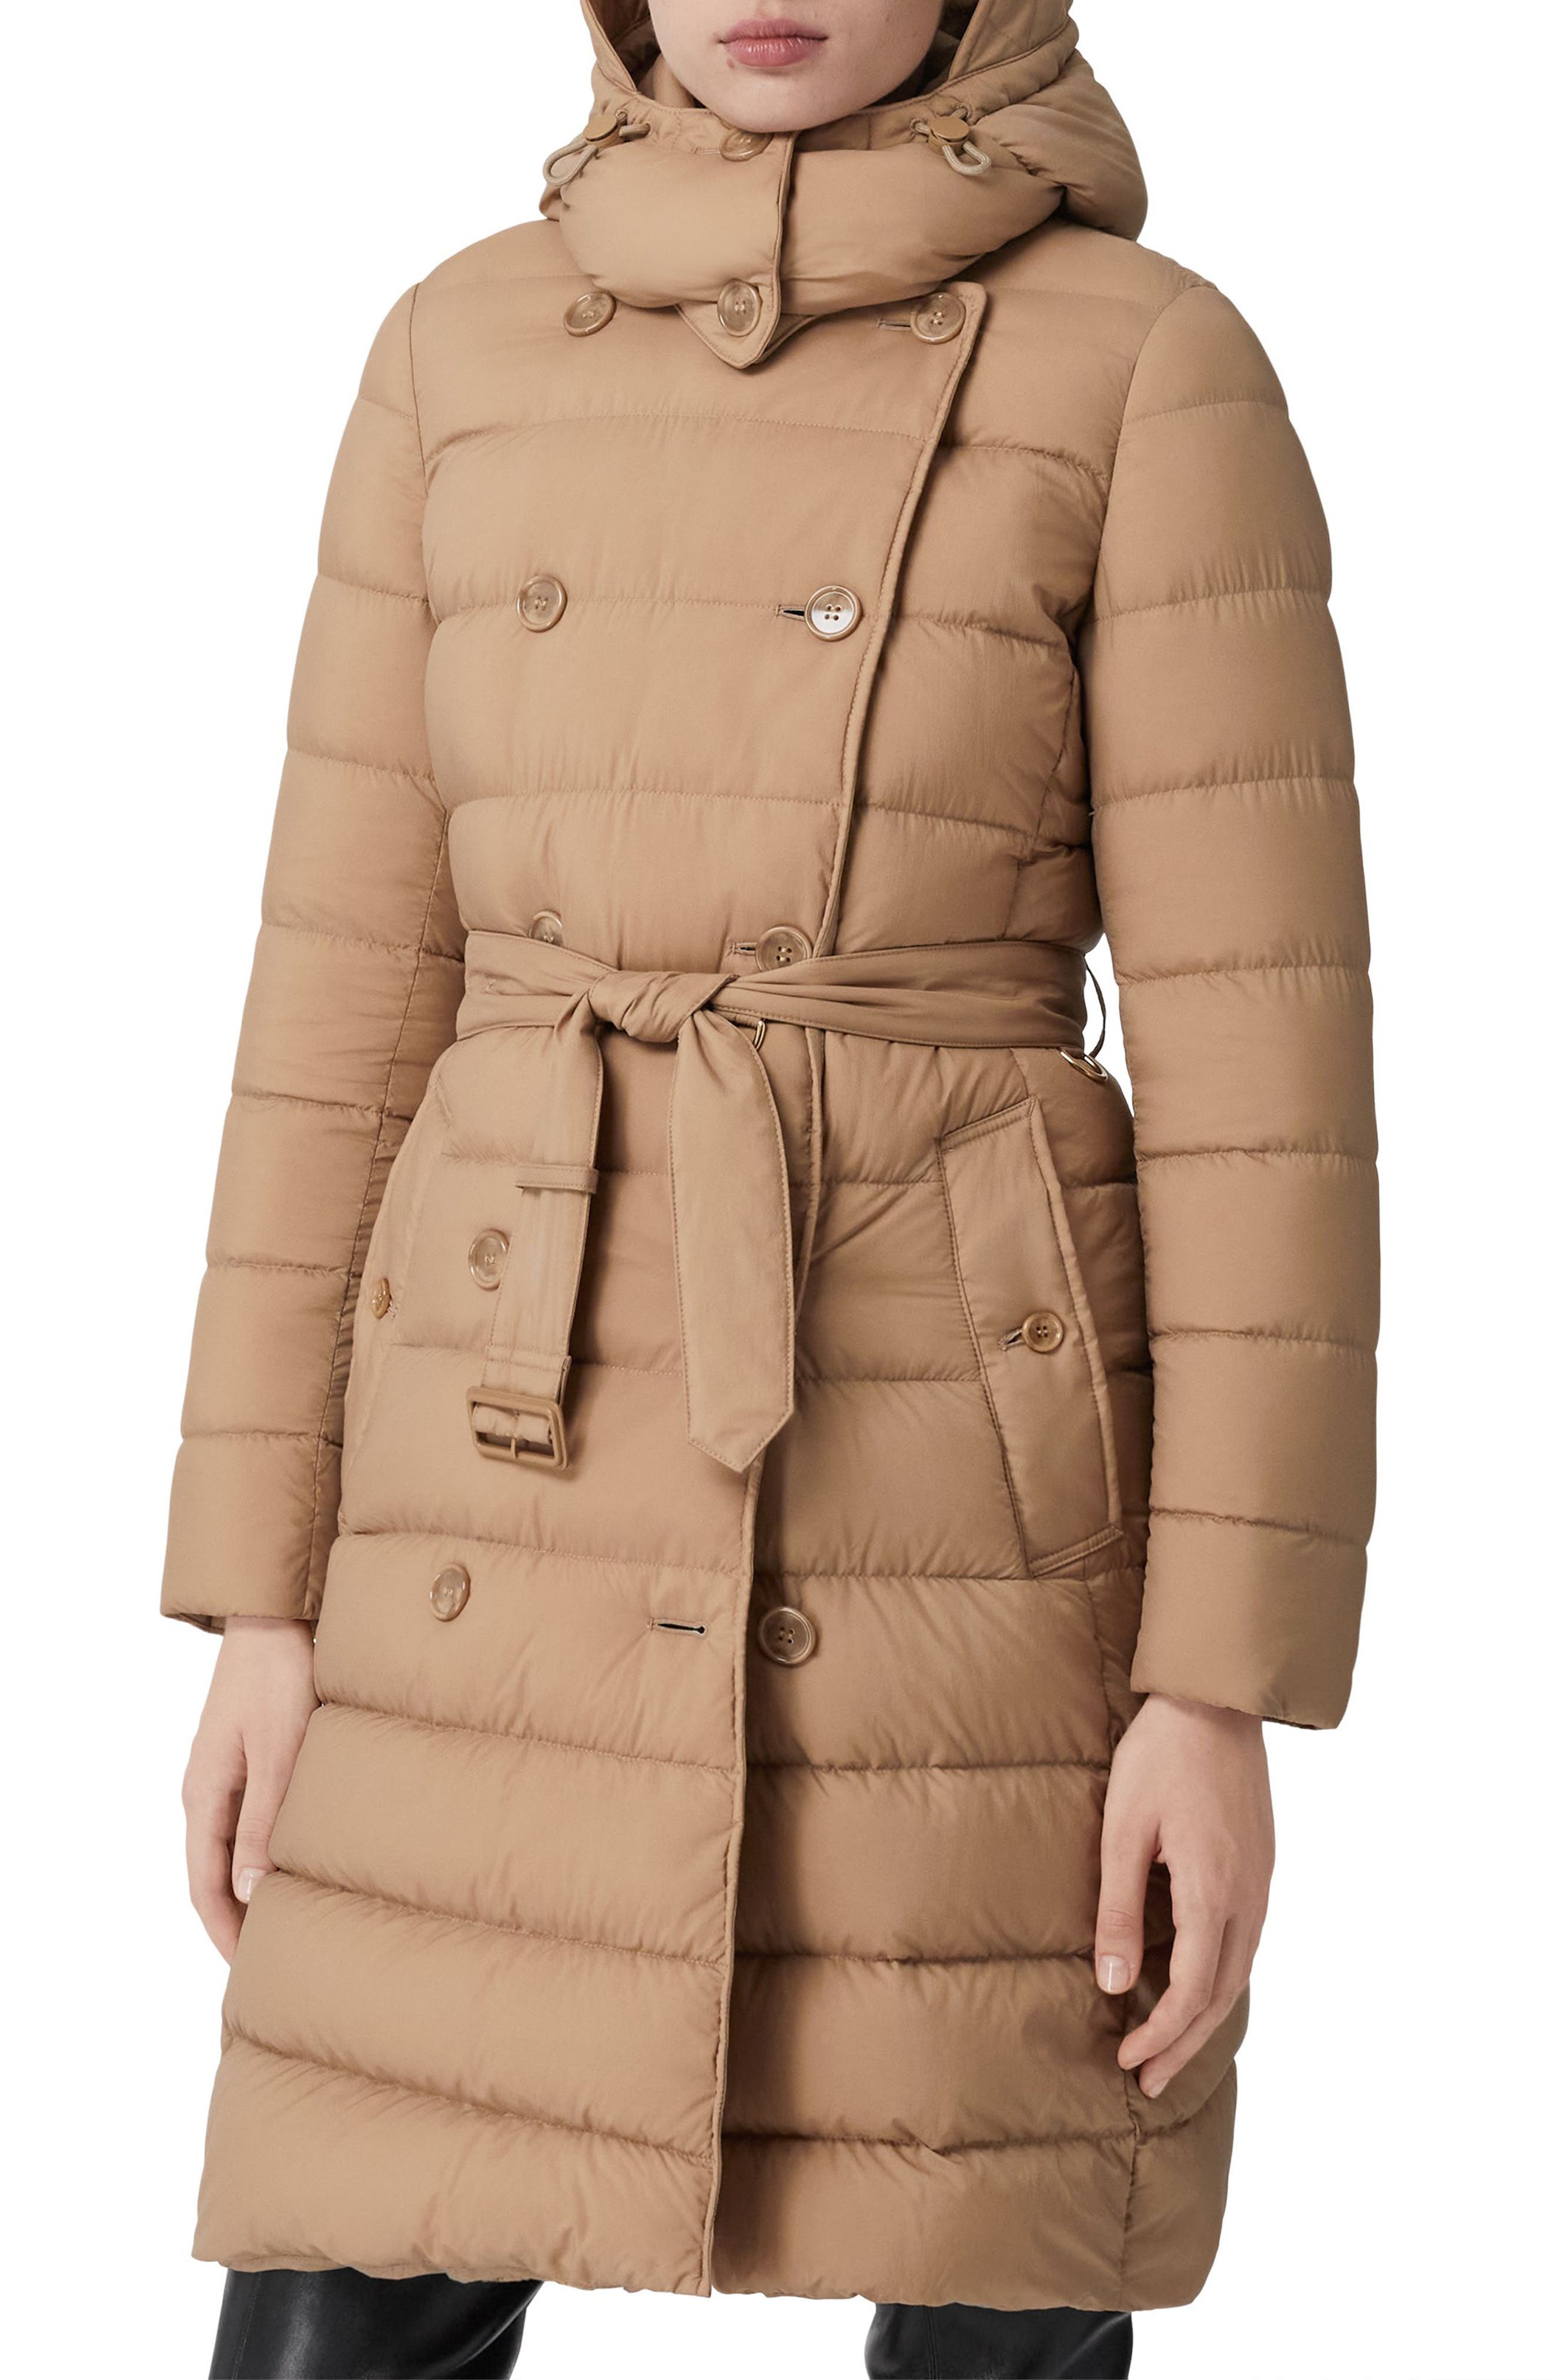 Jackets Burberry Women Women Clothing Burberry Women Coats & Jackets Burberry Women Vestes & Paletots Burberry Women Jackets Burberry Women S, T1 Jacket BURBERRY 36 red 